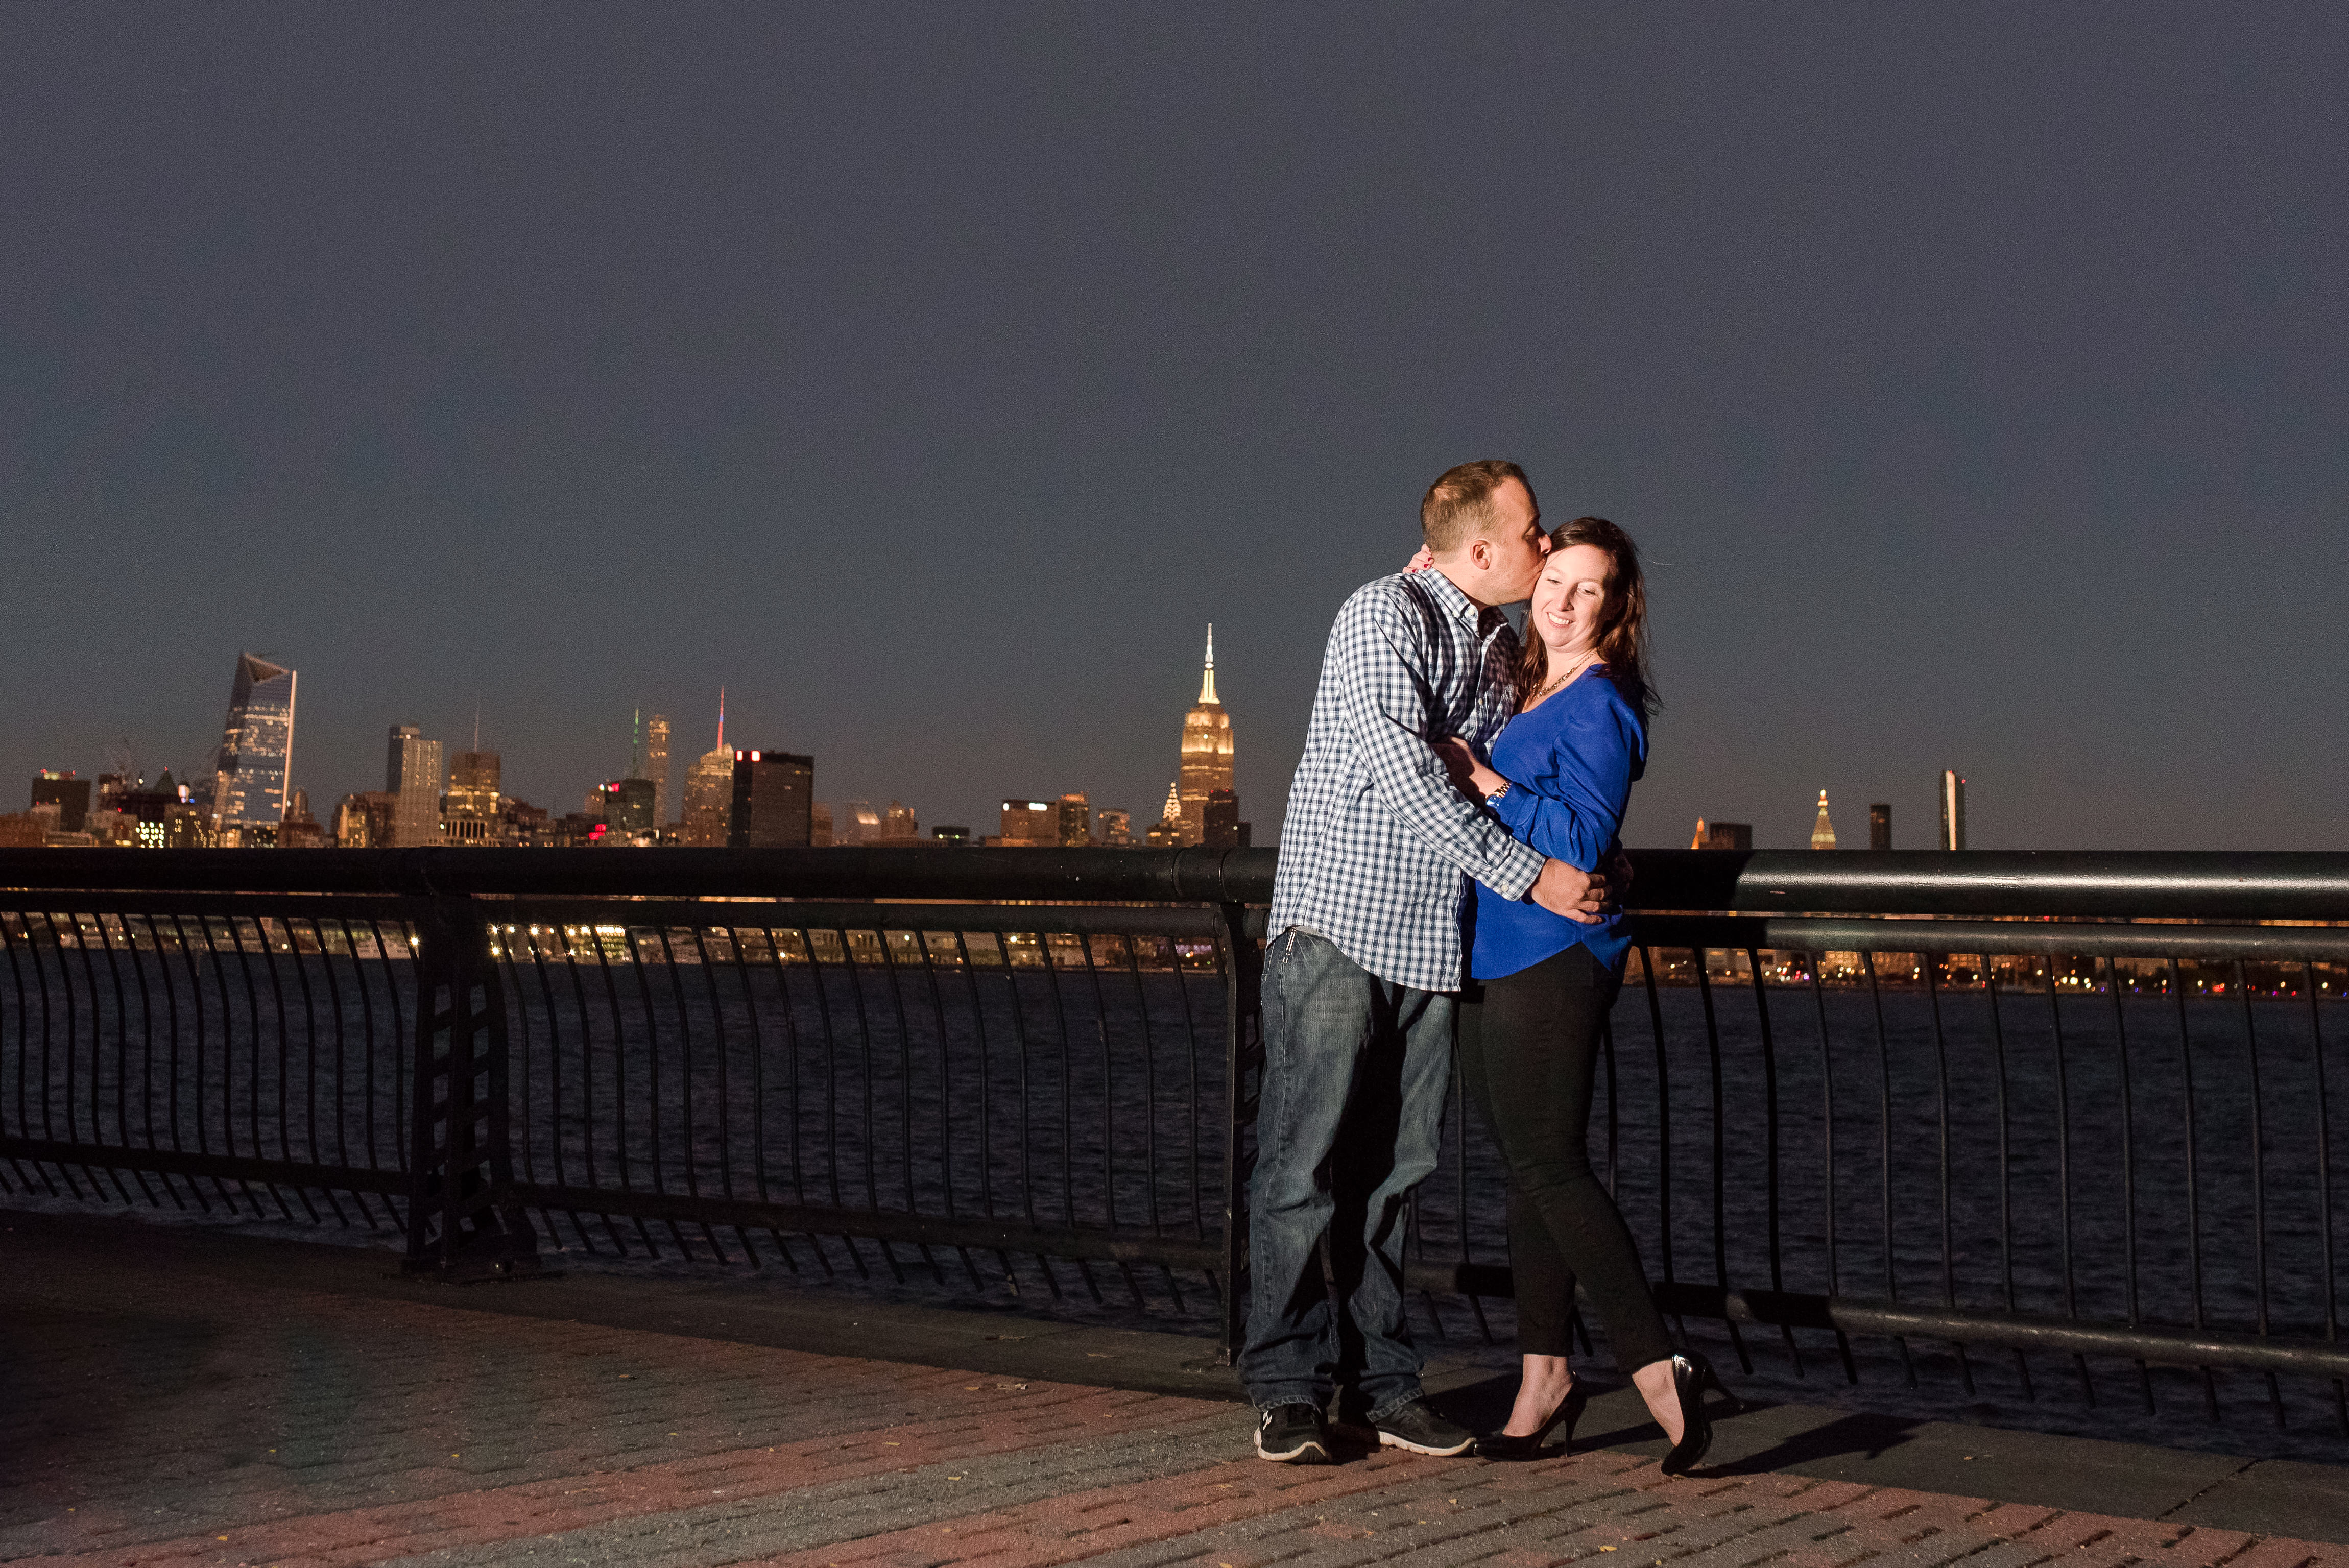 kelly-chris-fall-hoboken-engagement-session-imagery-by-marianne-2016-96